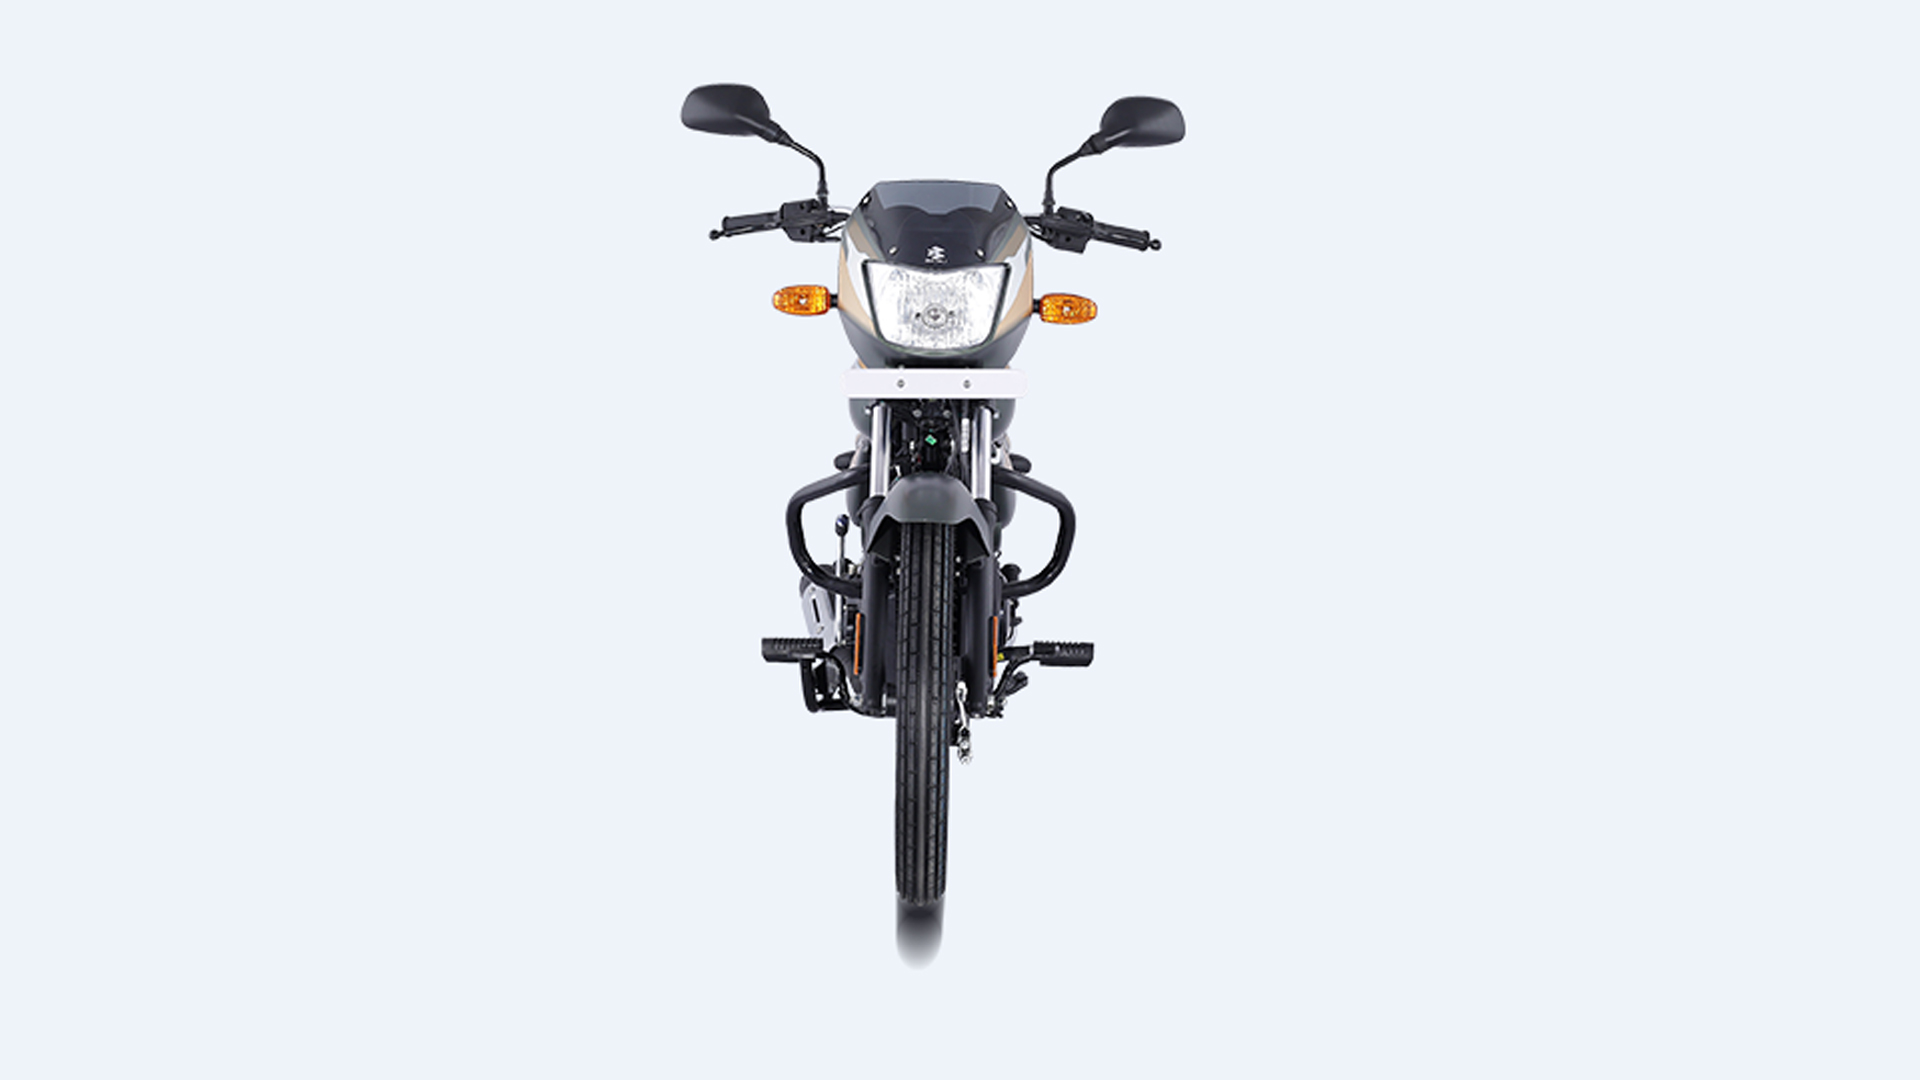 Bajaj Ct 100 15 Alloy Price Mileage Reviews Specification Gallery Overdrive